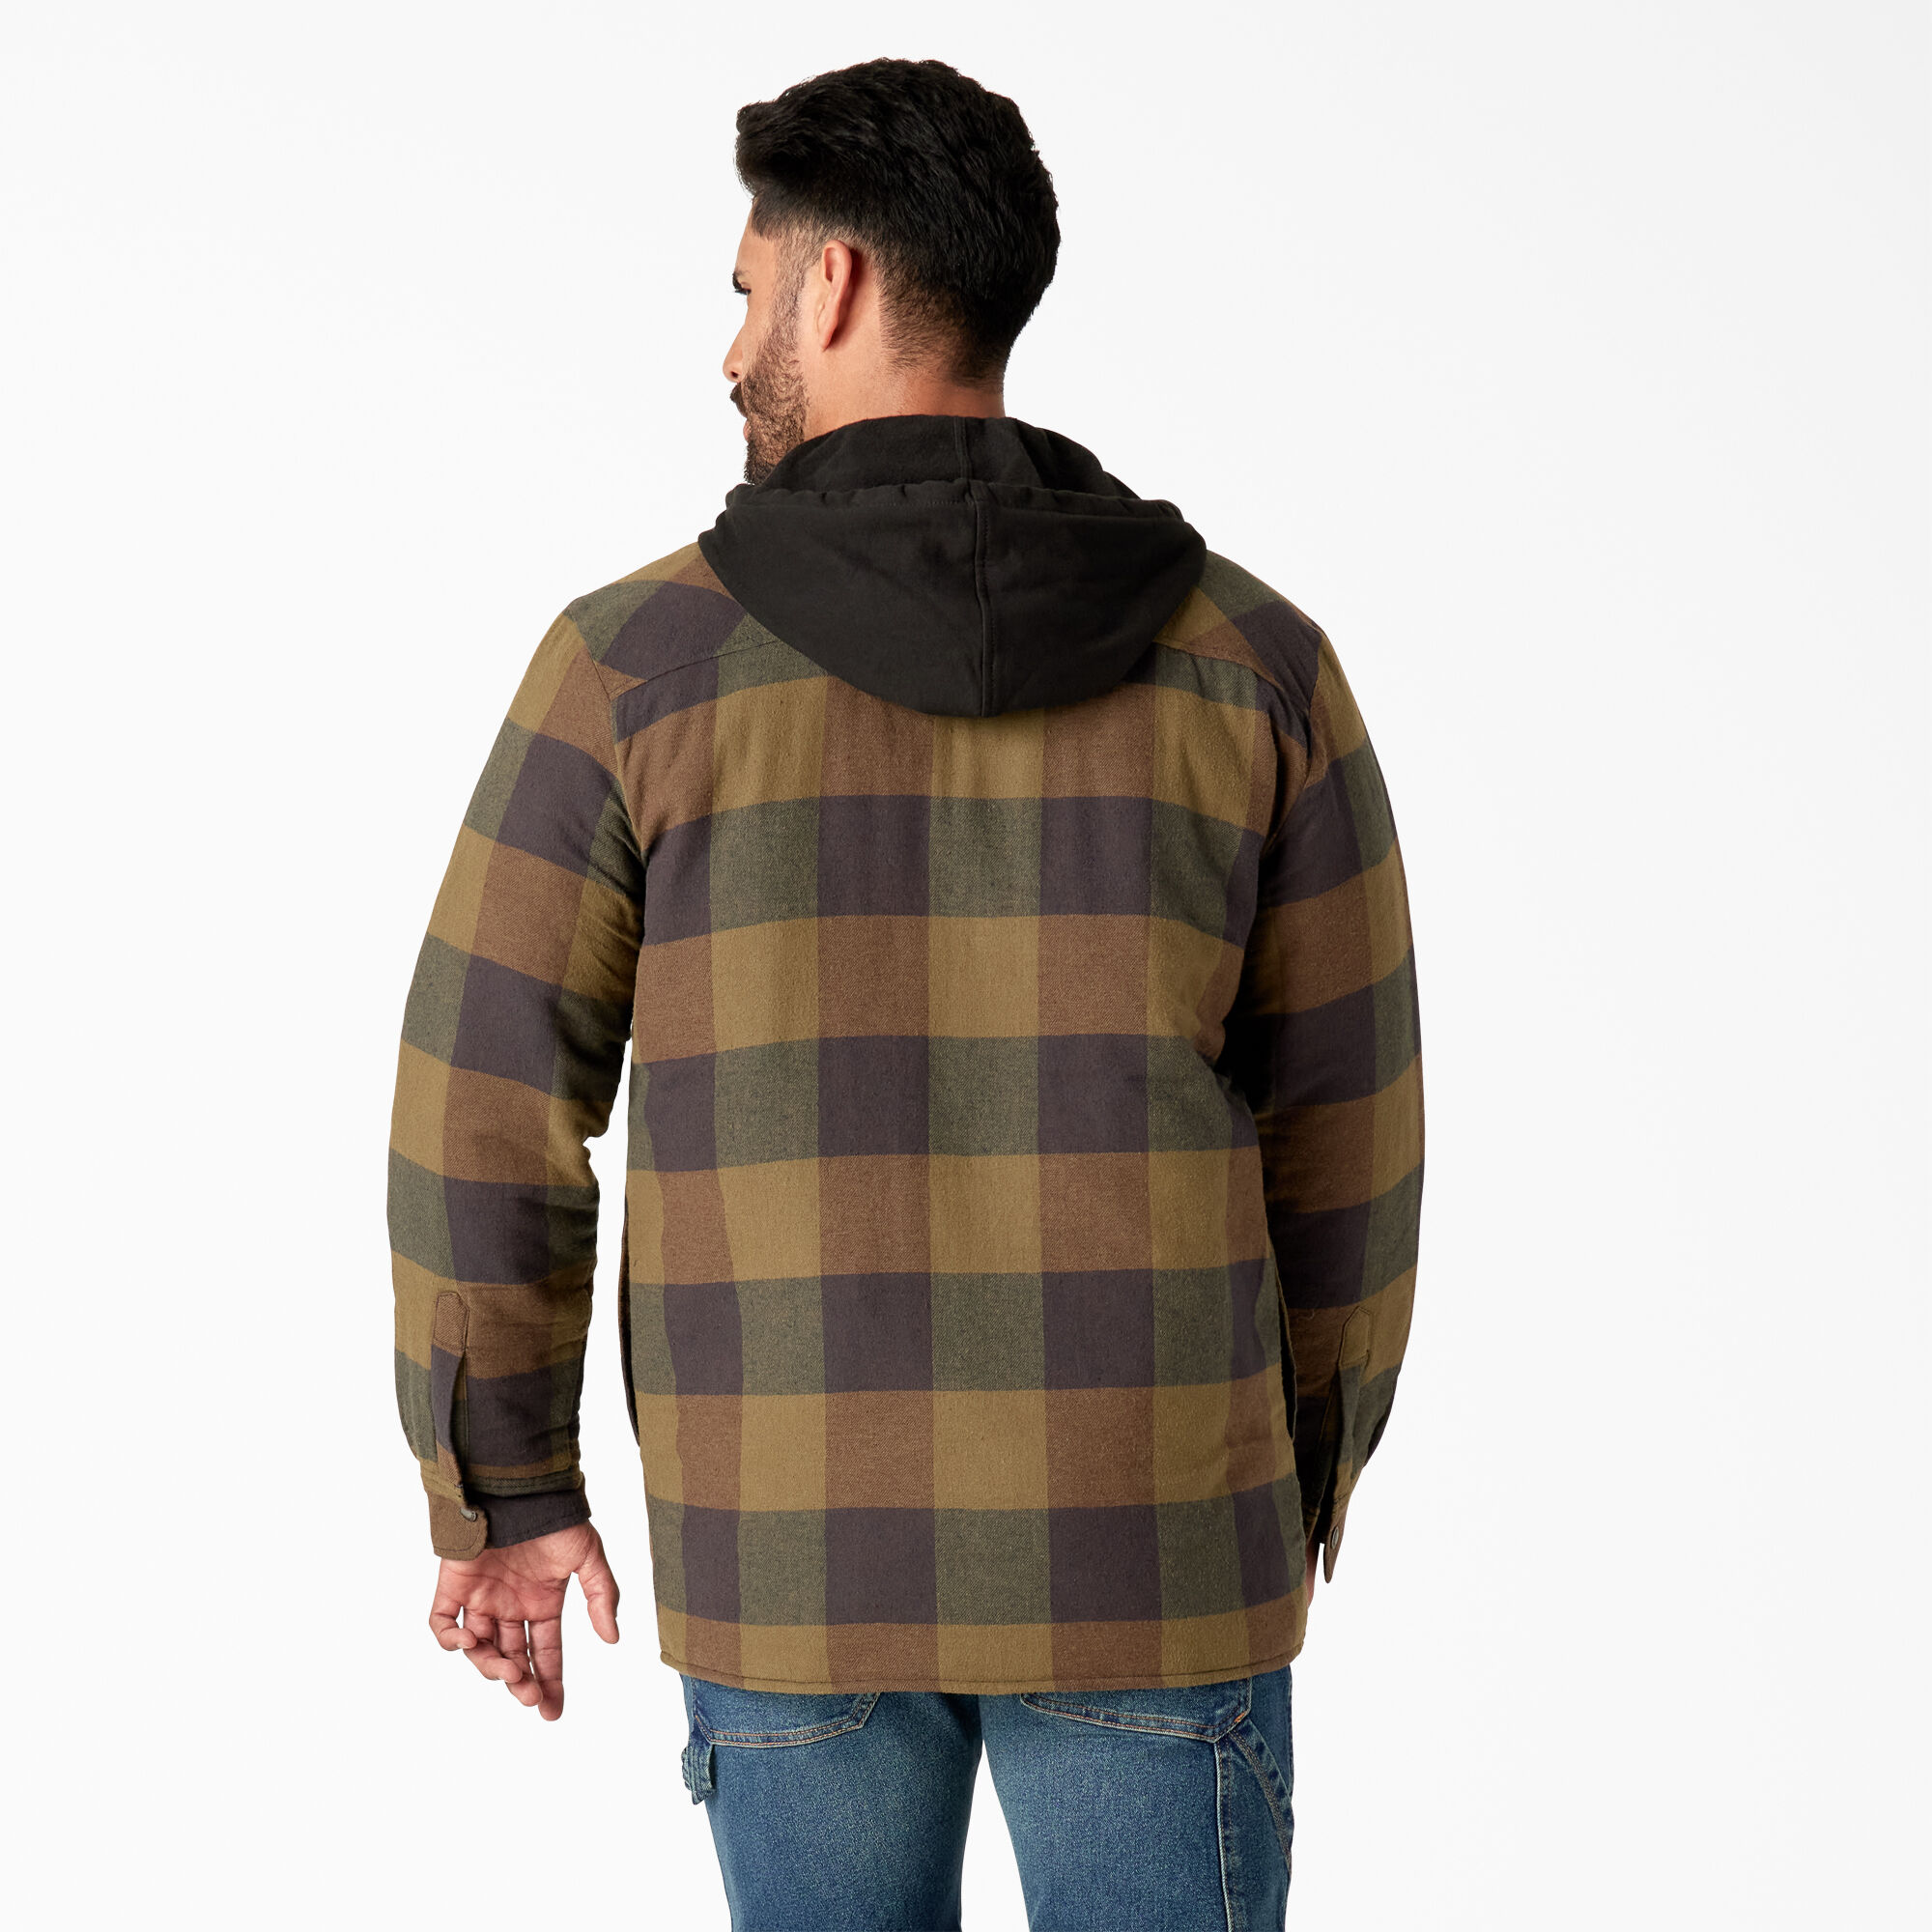 Relaxed Fit Hooded Quilted Shirt Jacket | Men's Outerwear